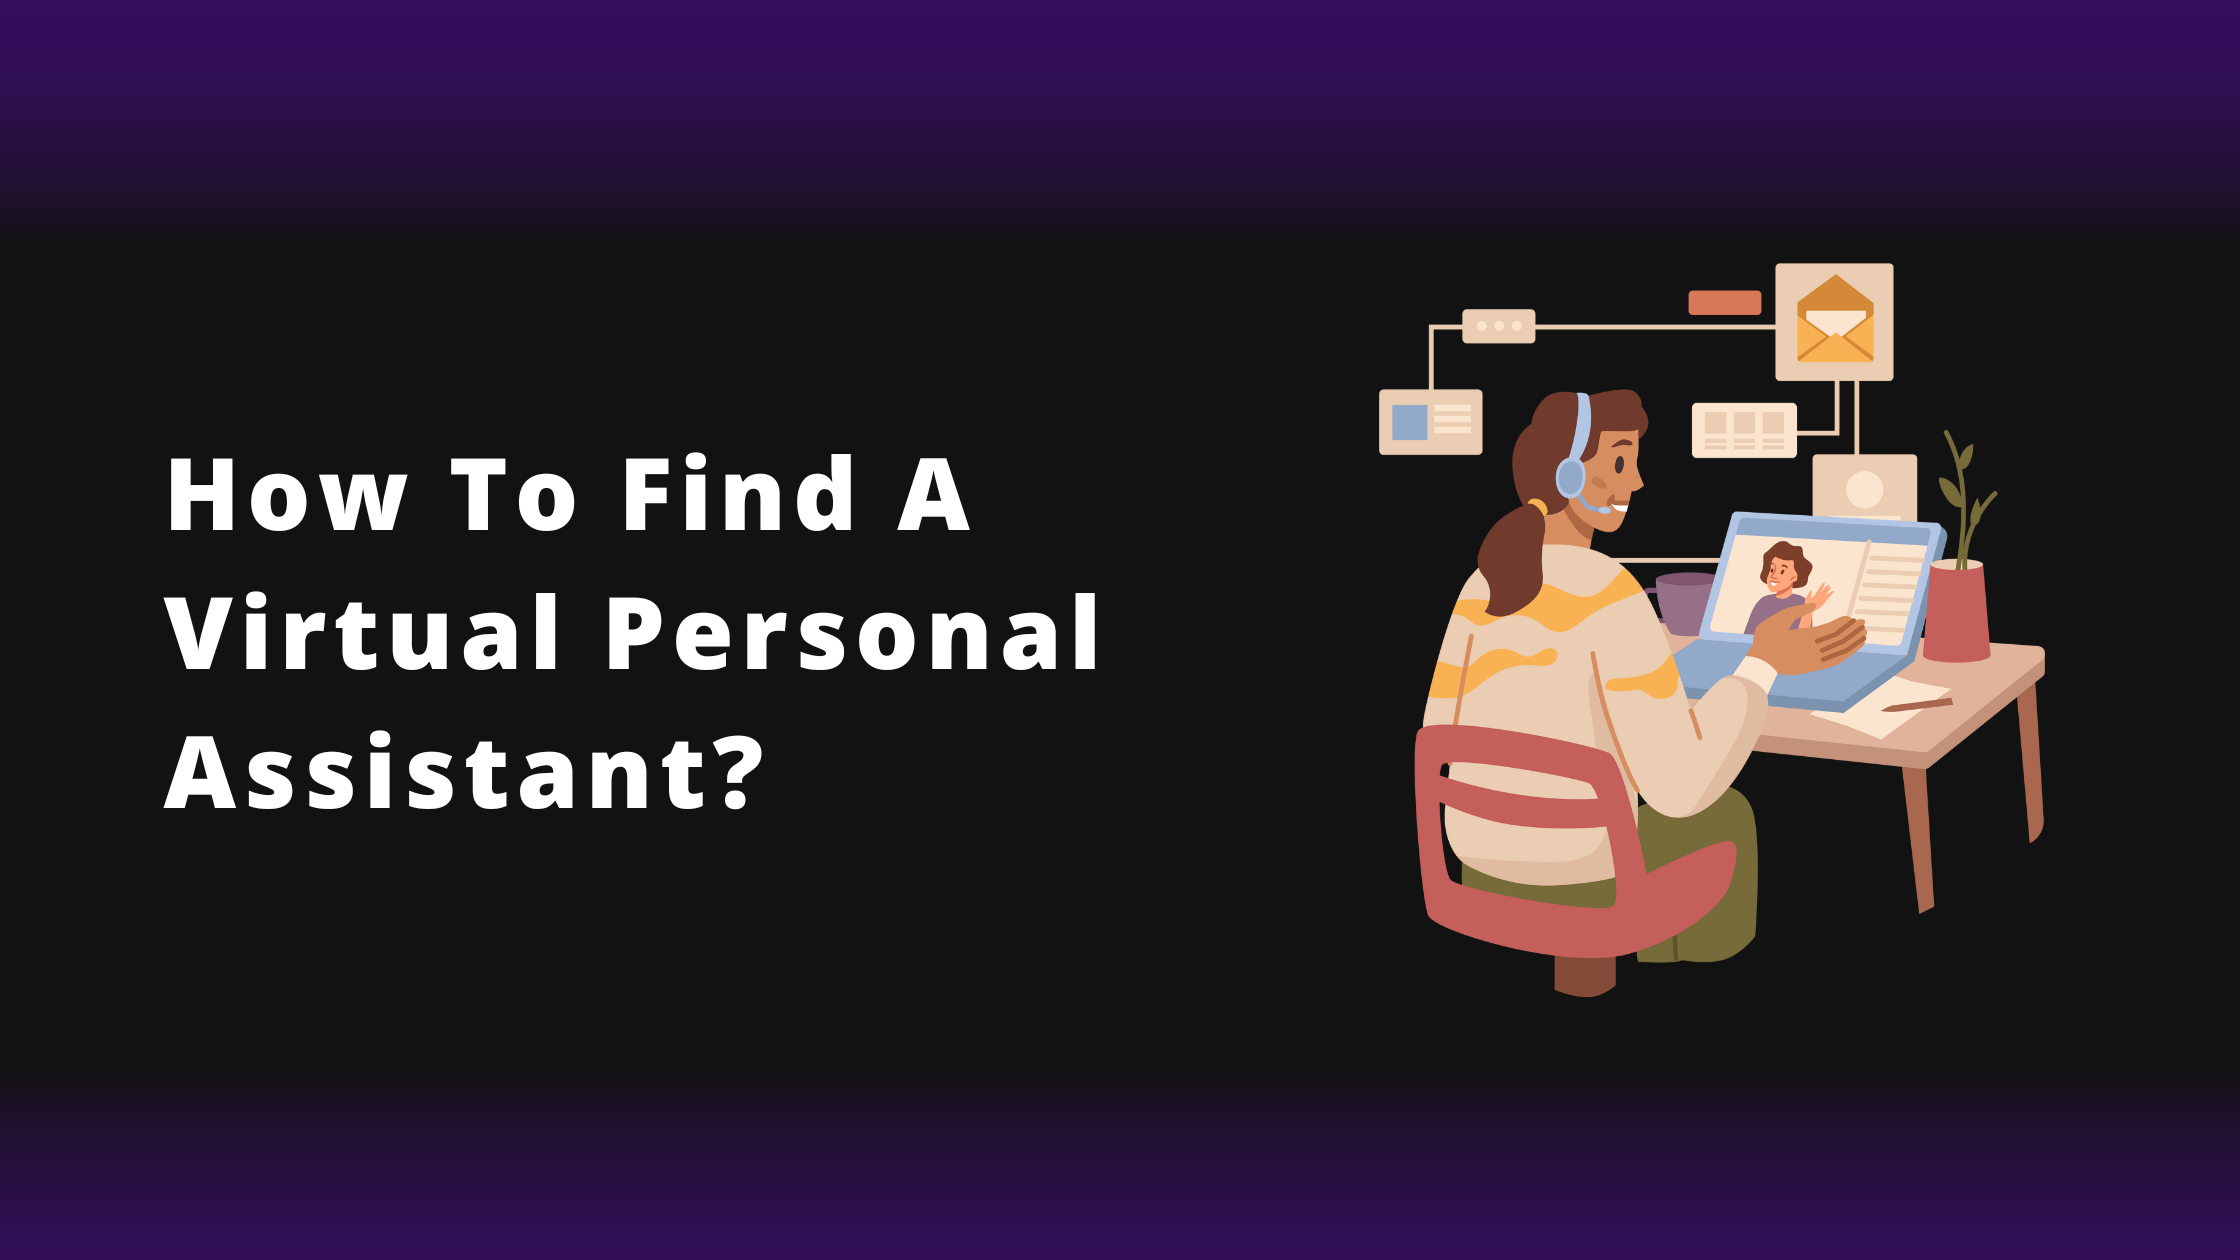 How To Find A Virtual Personal Assistant?